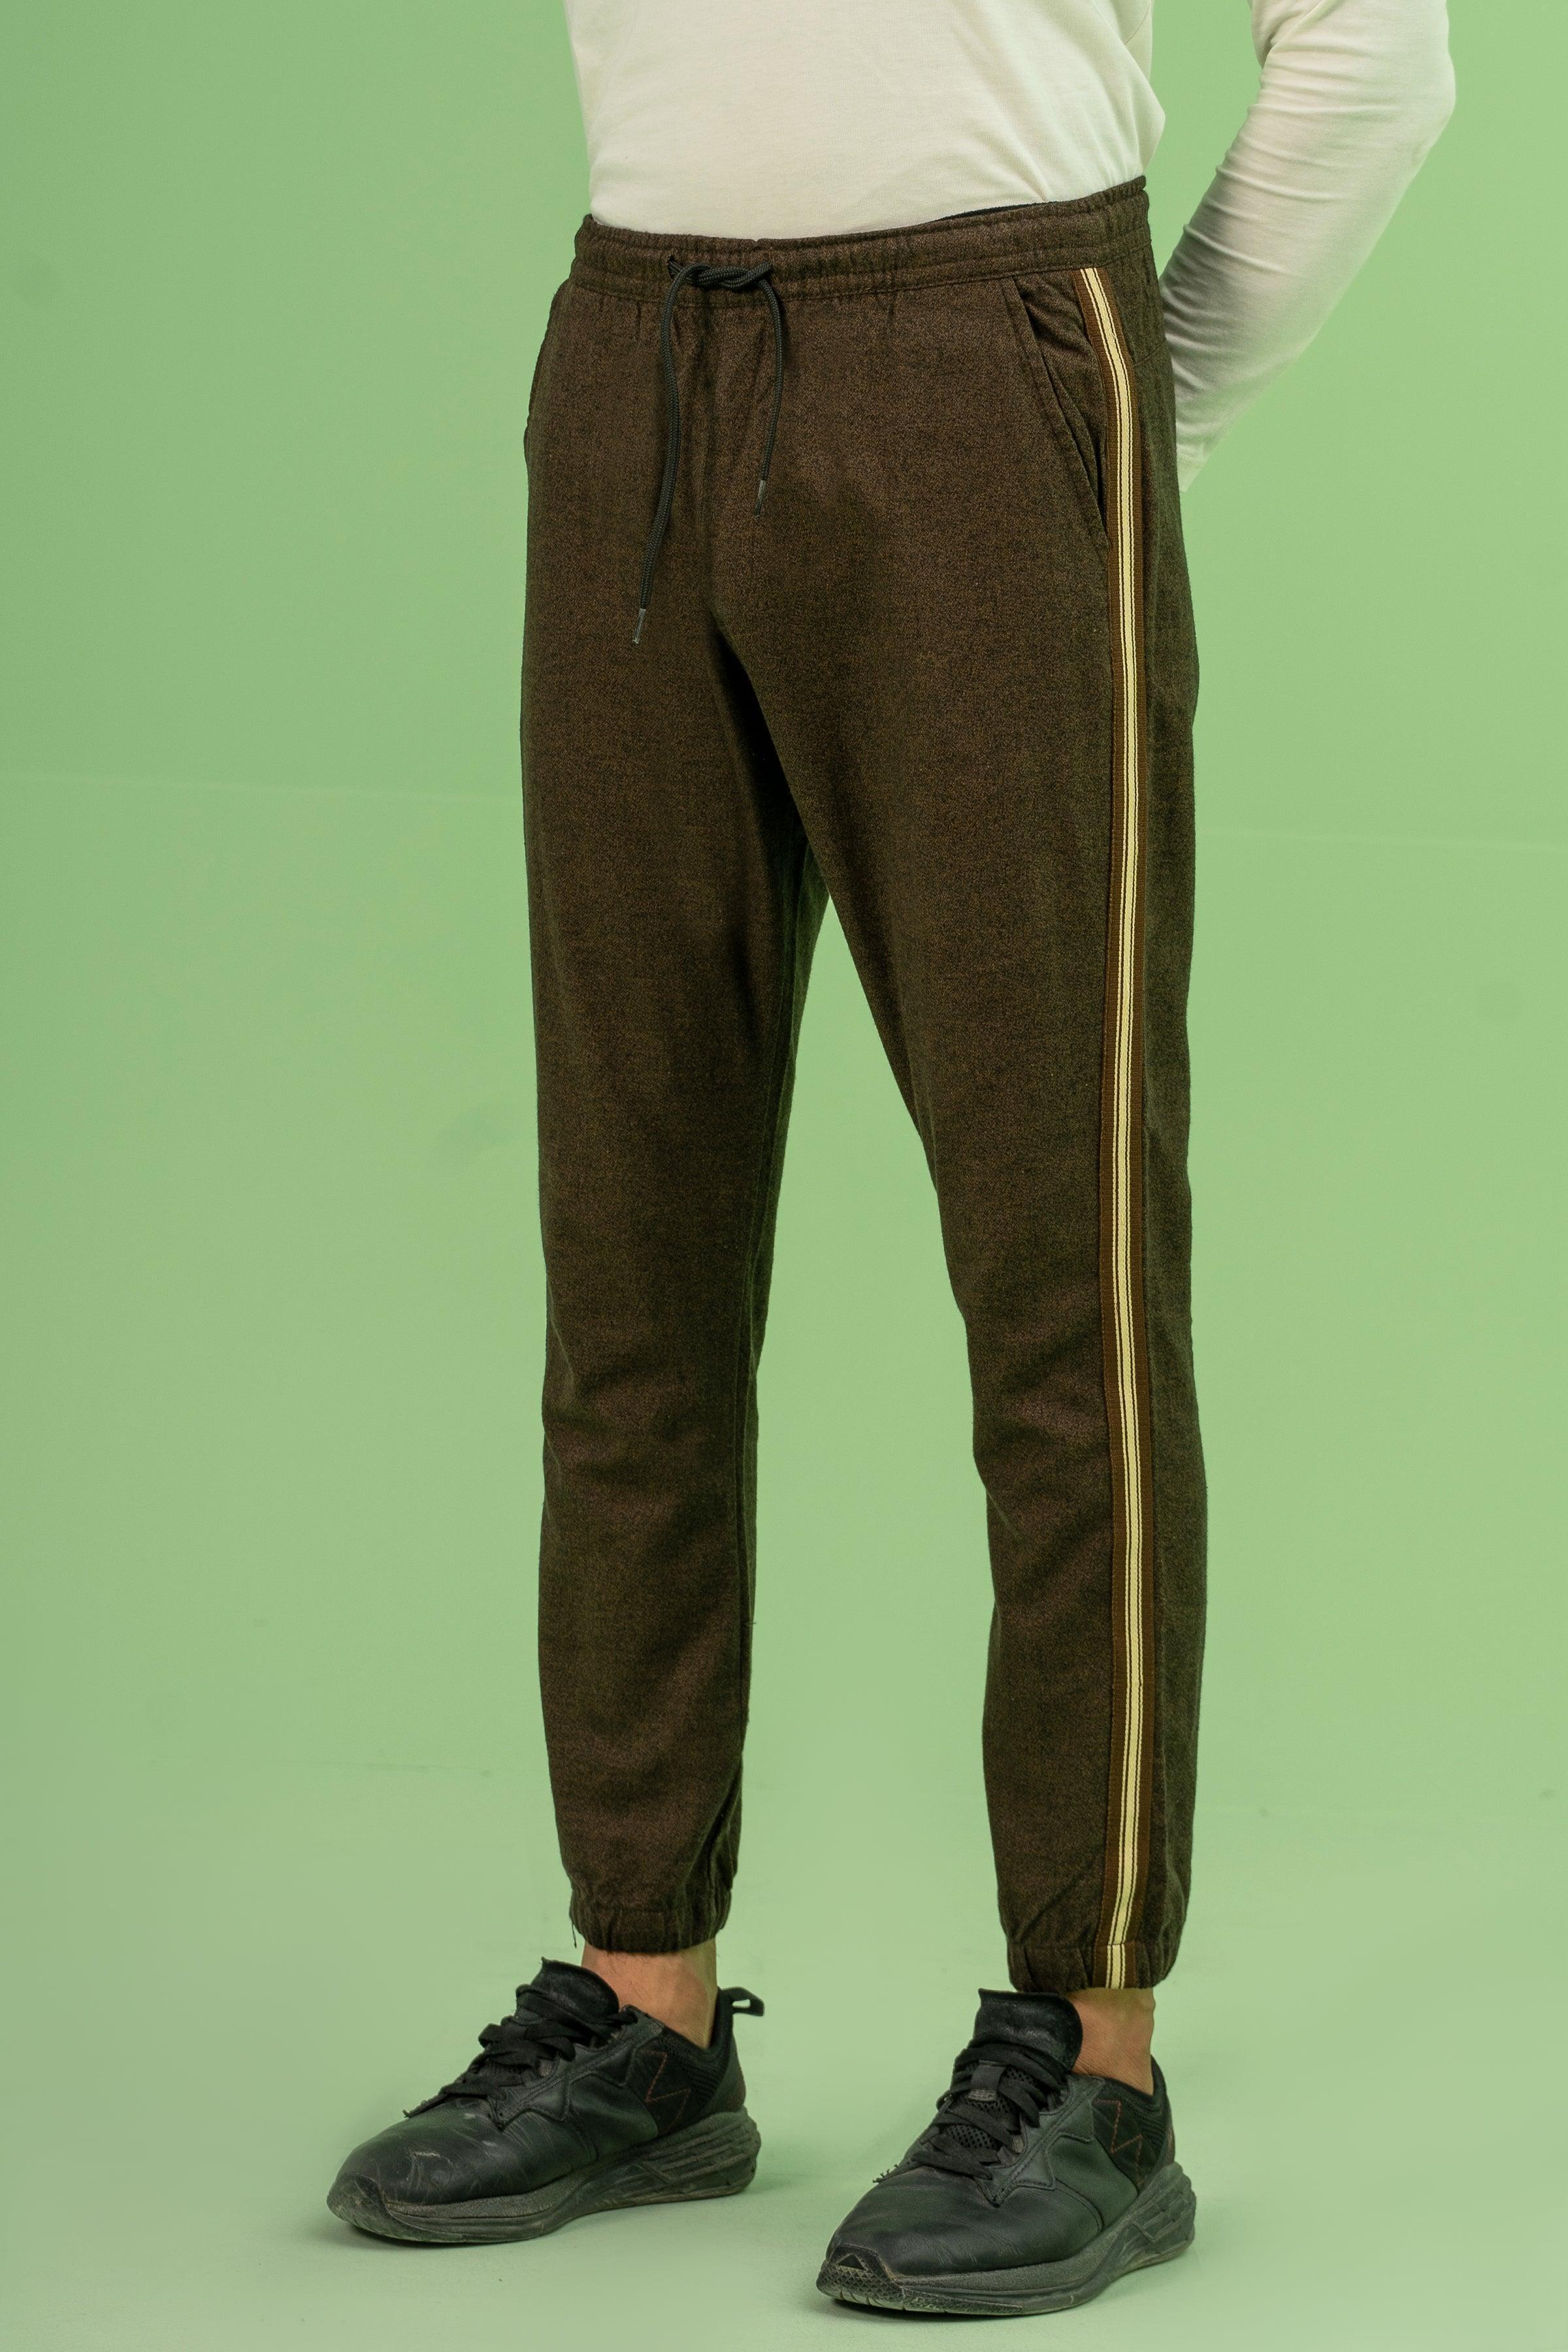 SELF TEXTURED CONTRAST TAPE TROUSER BROWN KHAKI at Charcoal Clothing